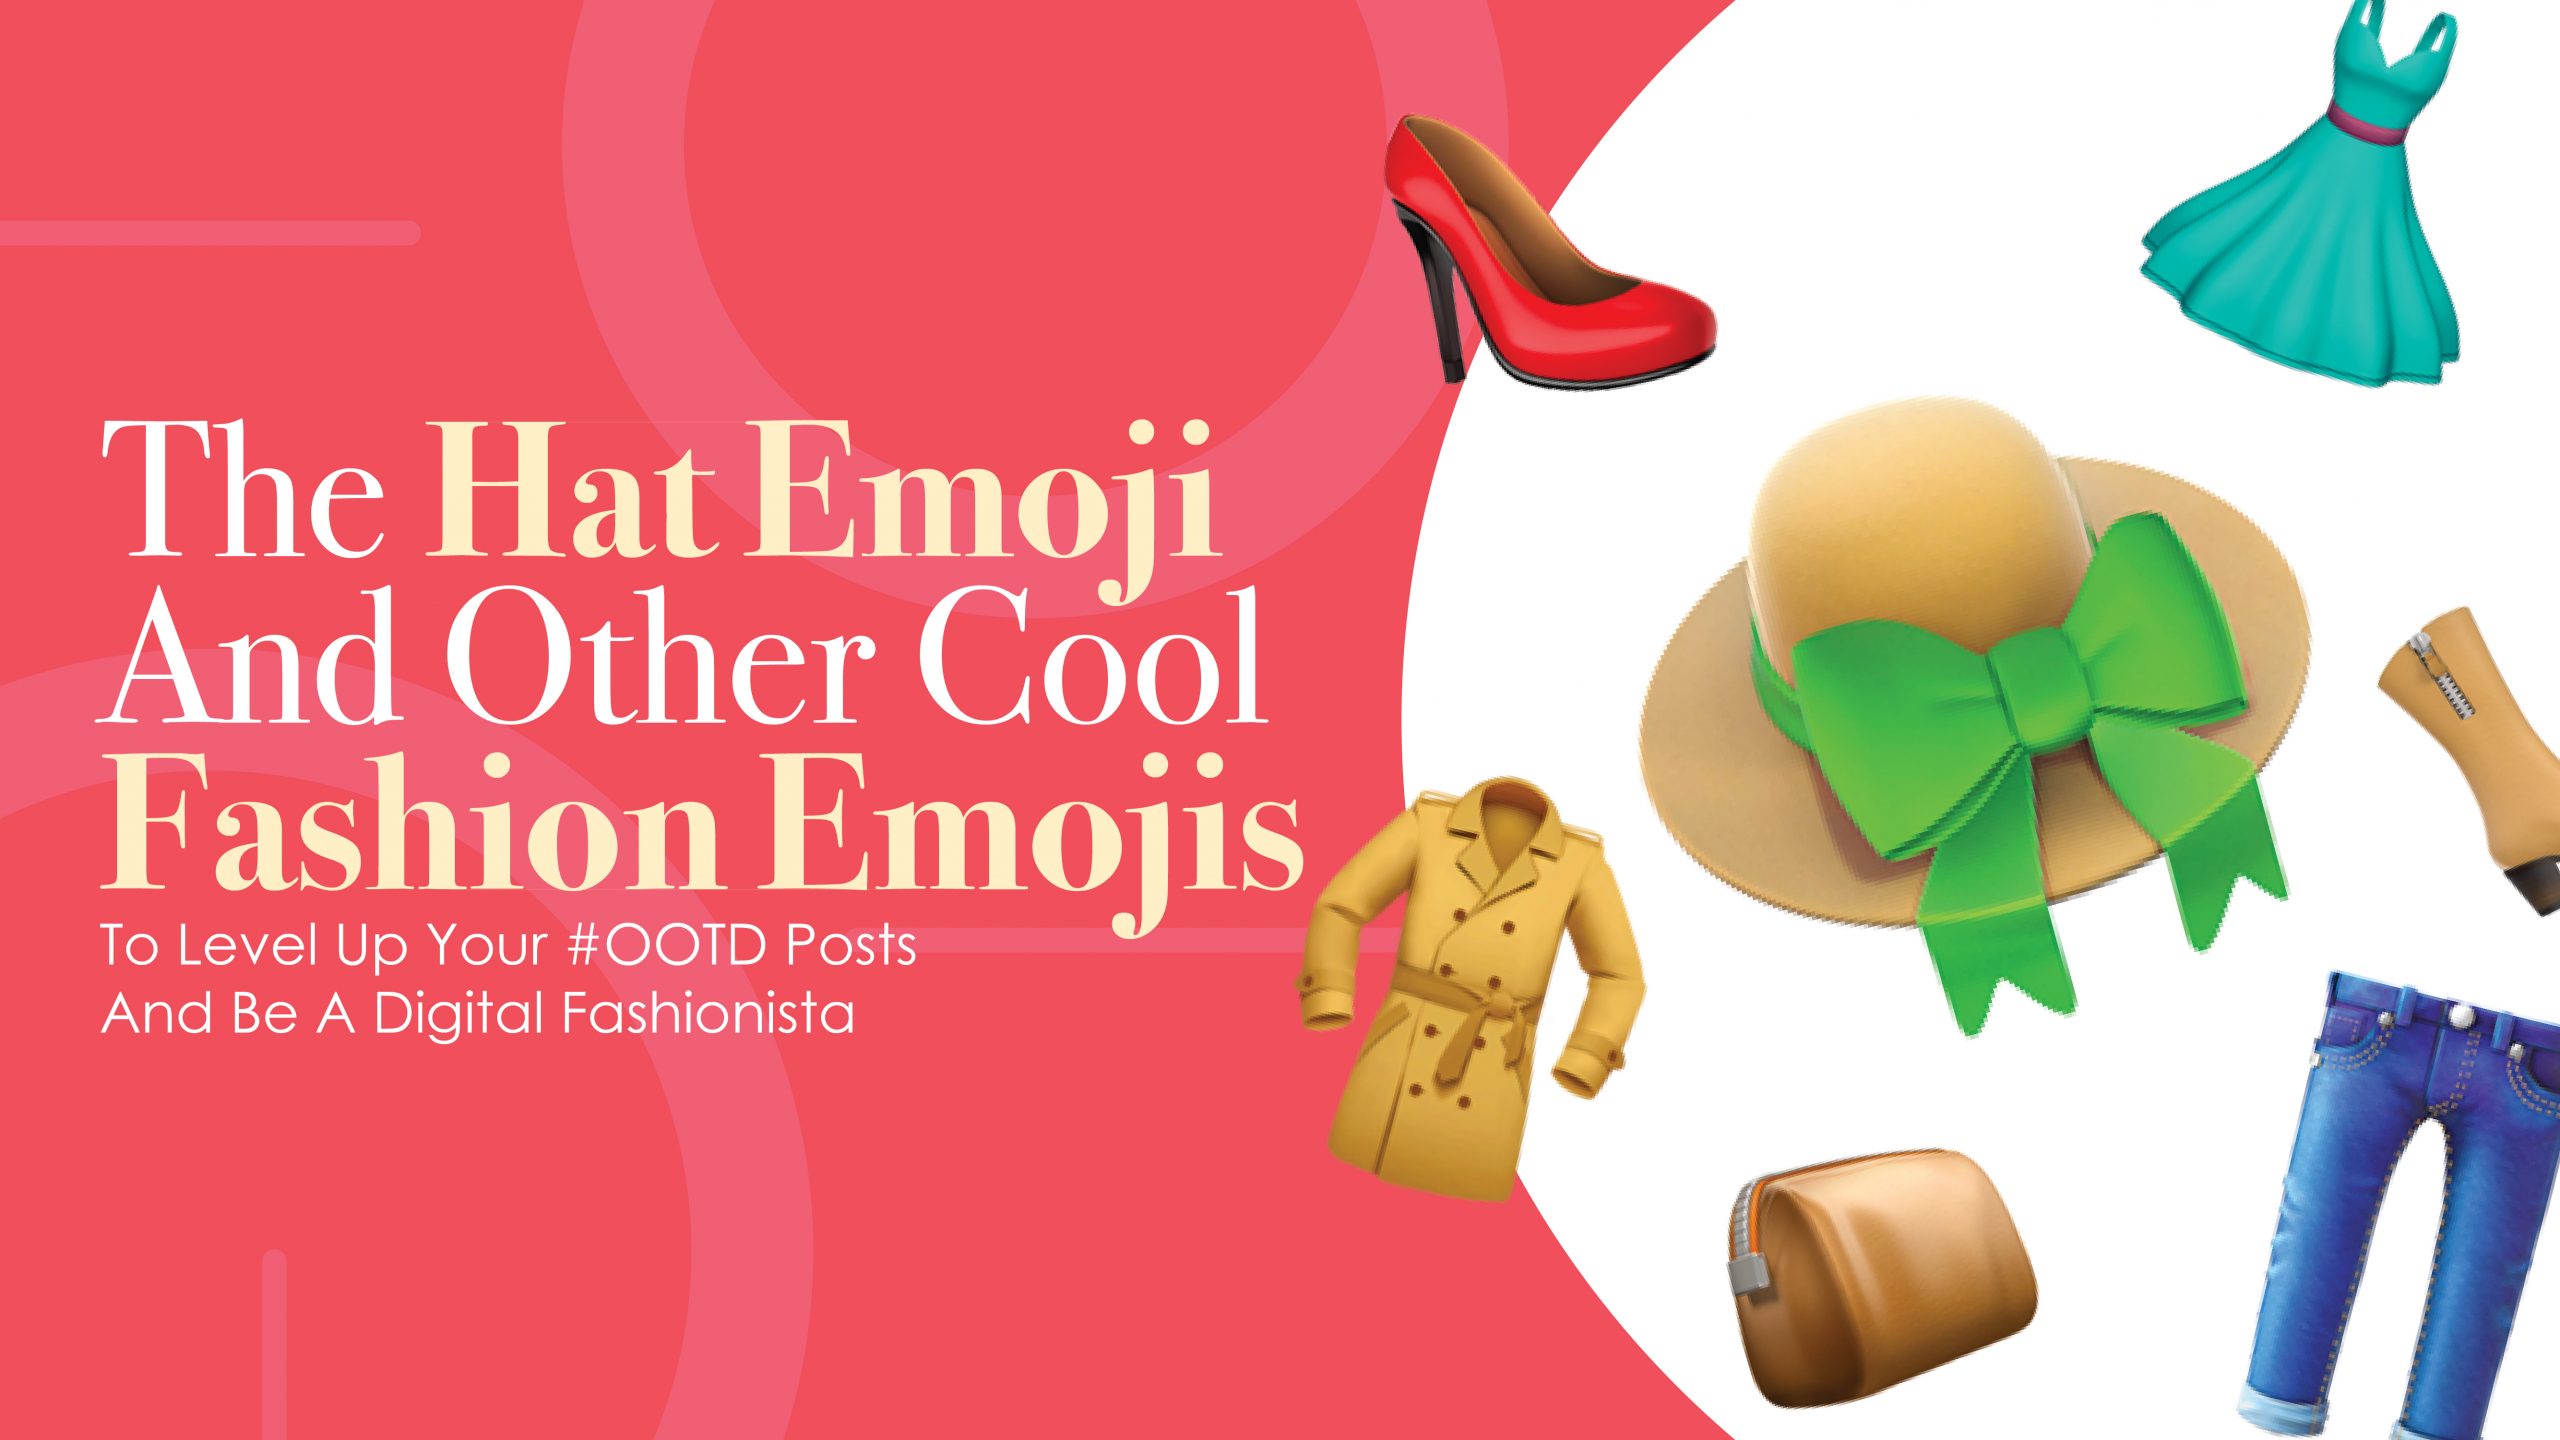 emoji outfits for girls